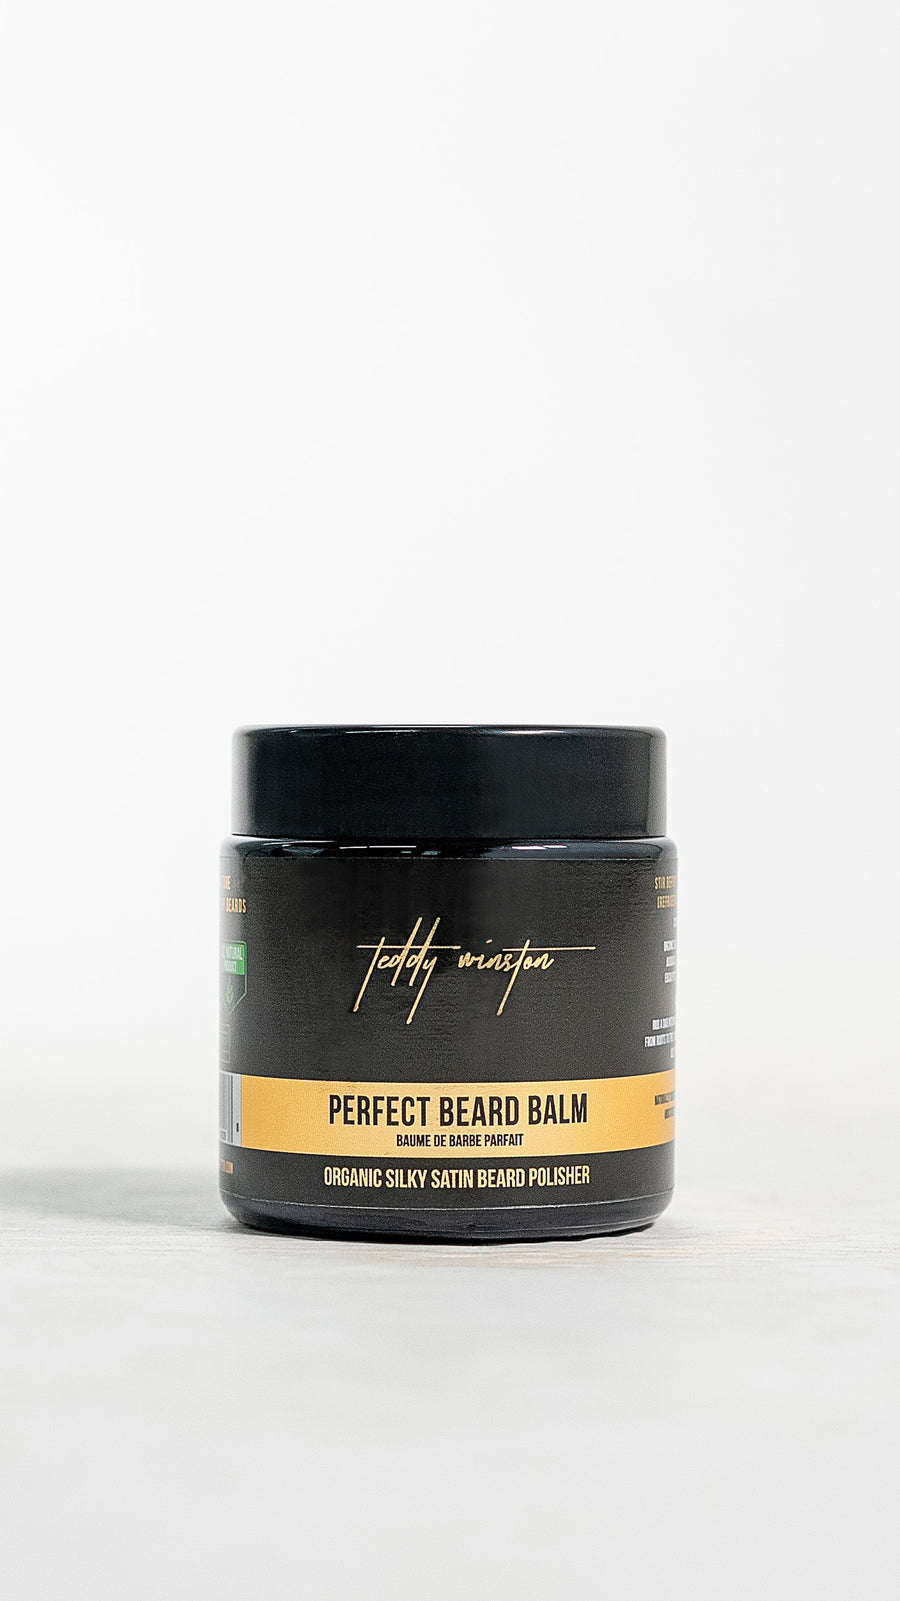 The perfect beard balm for men. An extreme hydrating balm - Thick leave in conditioner without greasy residue + anti bacterial and odor resistant.